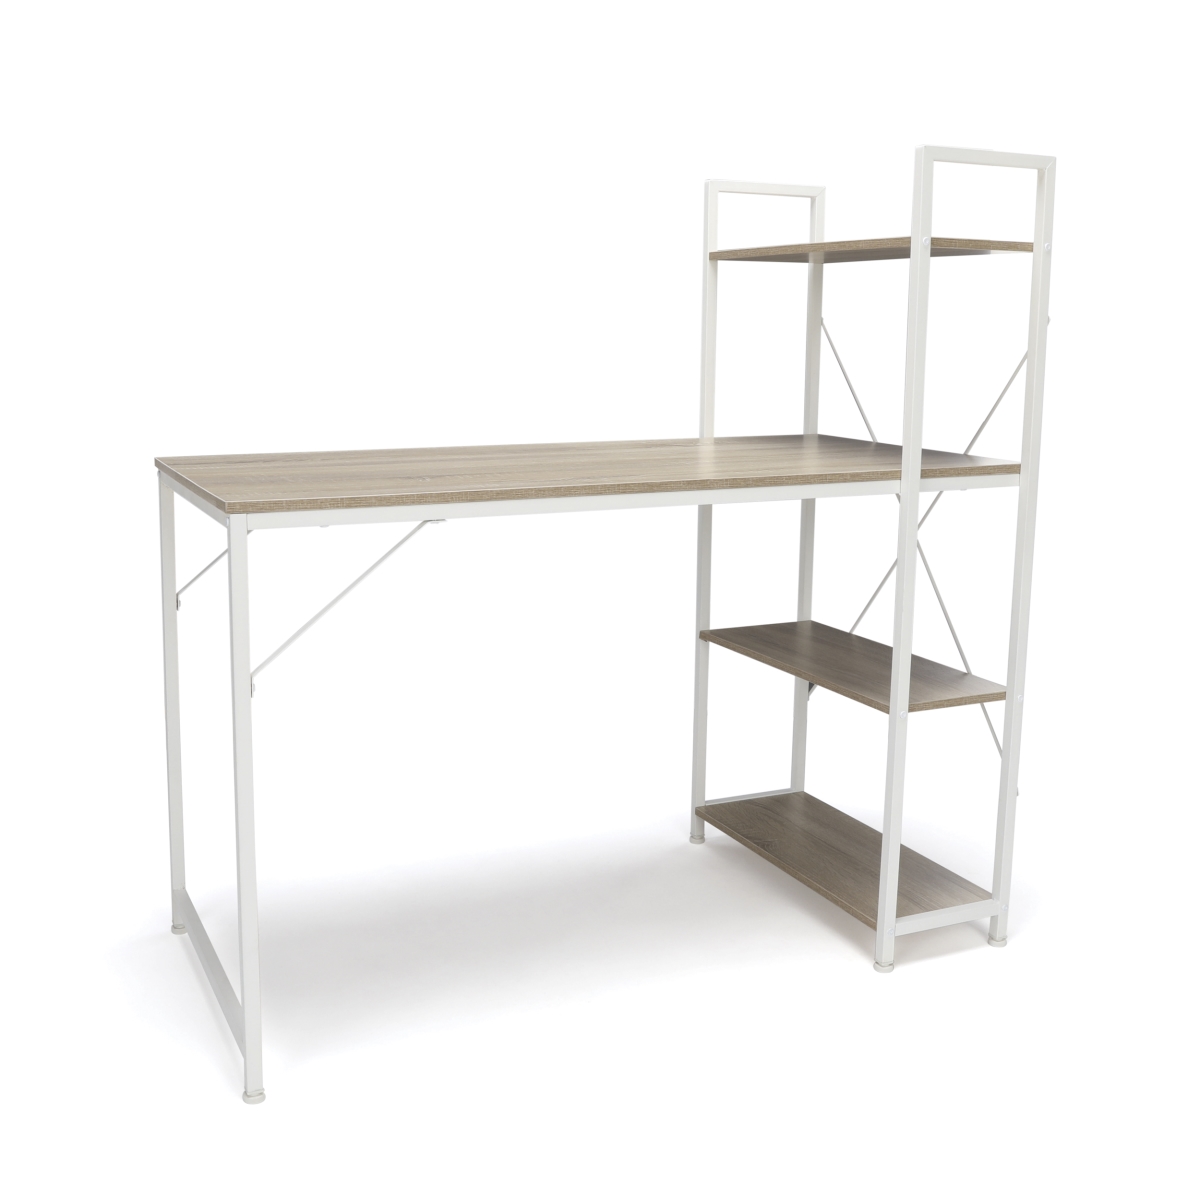 Ess-1004-wht-nat Combination Desk With 4 Shelf Unit, Natural With White Frame